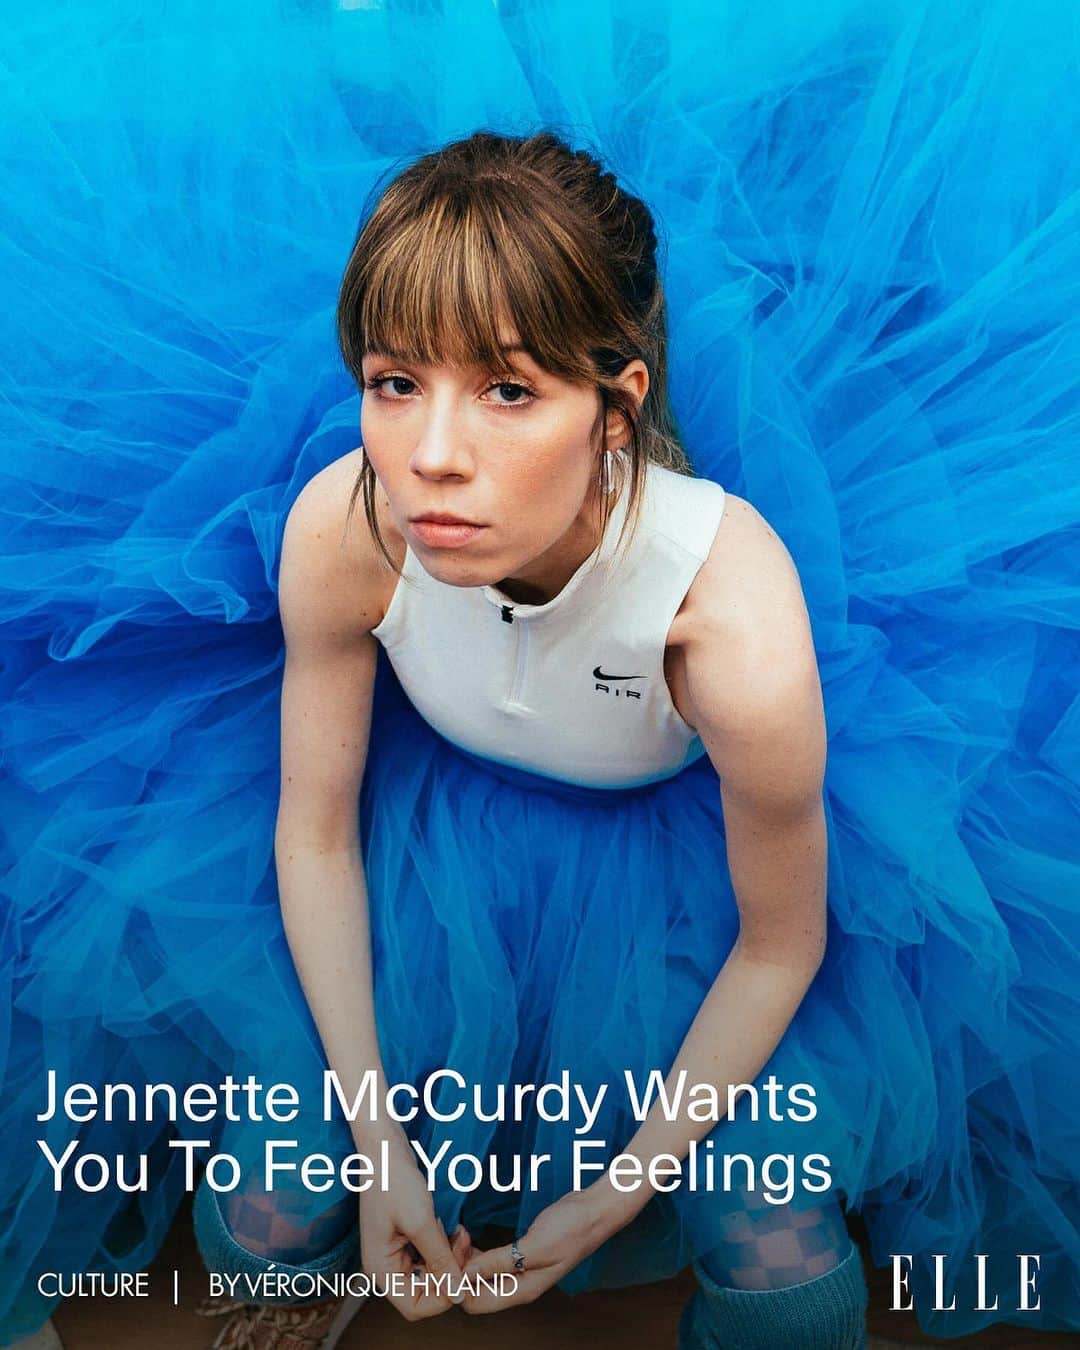 ELLE Magazineのインスタグラム：「#JennetteMcCurdy has a lot of feelings. Now she's exploring them in an off-the-cuff-feeling podcast, #HardFeelingsWithJennetteMcCurdy, in which she talks about whatever she happens to be feeling around the time of recording. Each micro-episode feels as intimate as morning breath—like getting a voice memo from a friend, captured at that precise point between feeling something and analyzing it. McCurdy talks to @niquepeeks about how she learned to process her emotions, her thoughts on how mental health "awareness" isn't enough, and why having big feelings is, ultimately, worth the ups and downs. Click the link in bio.」